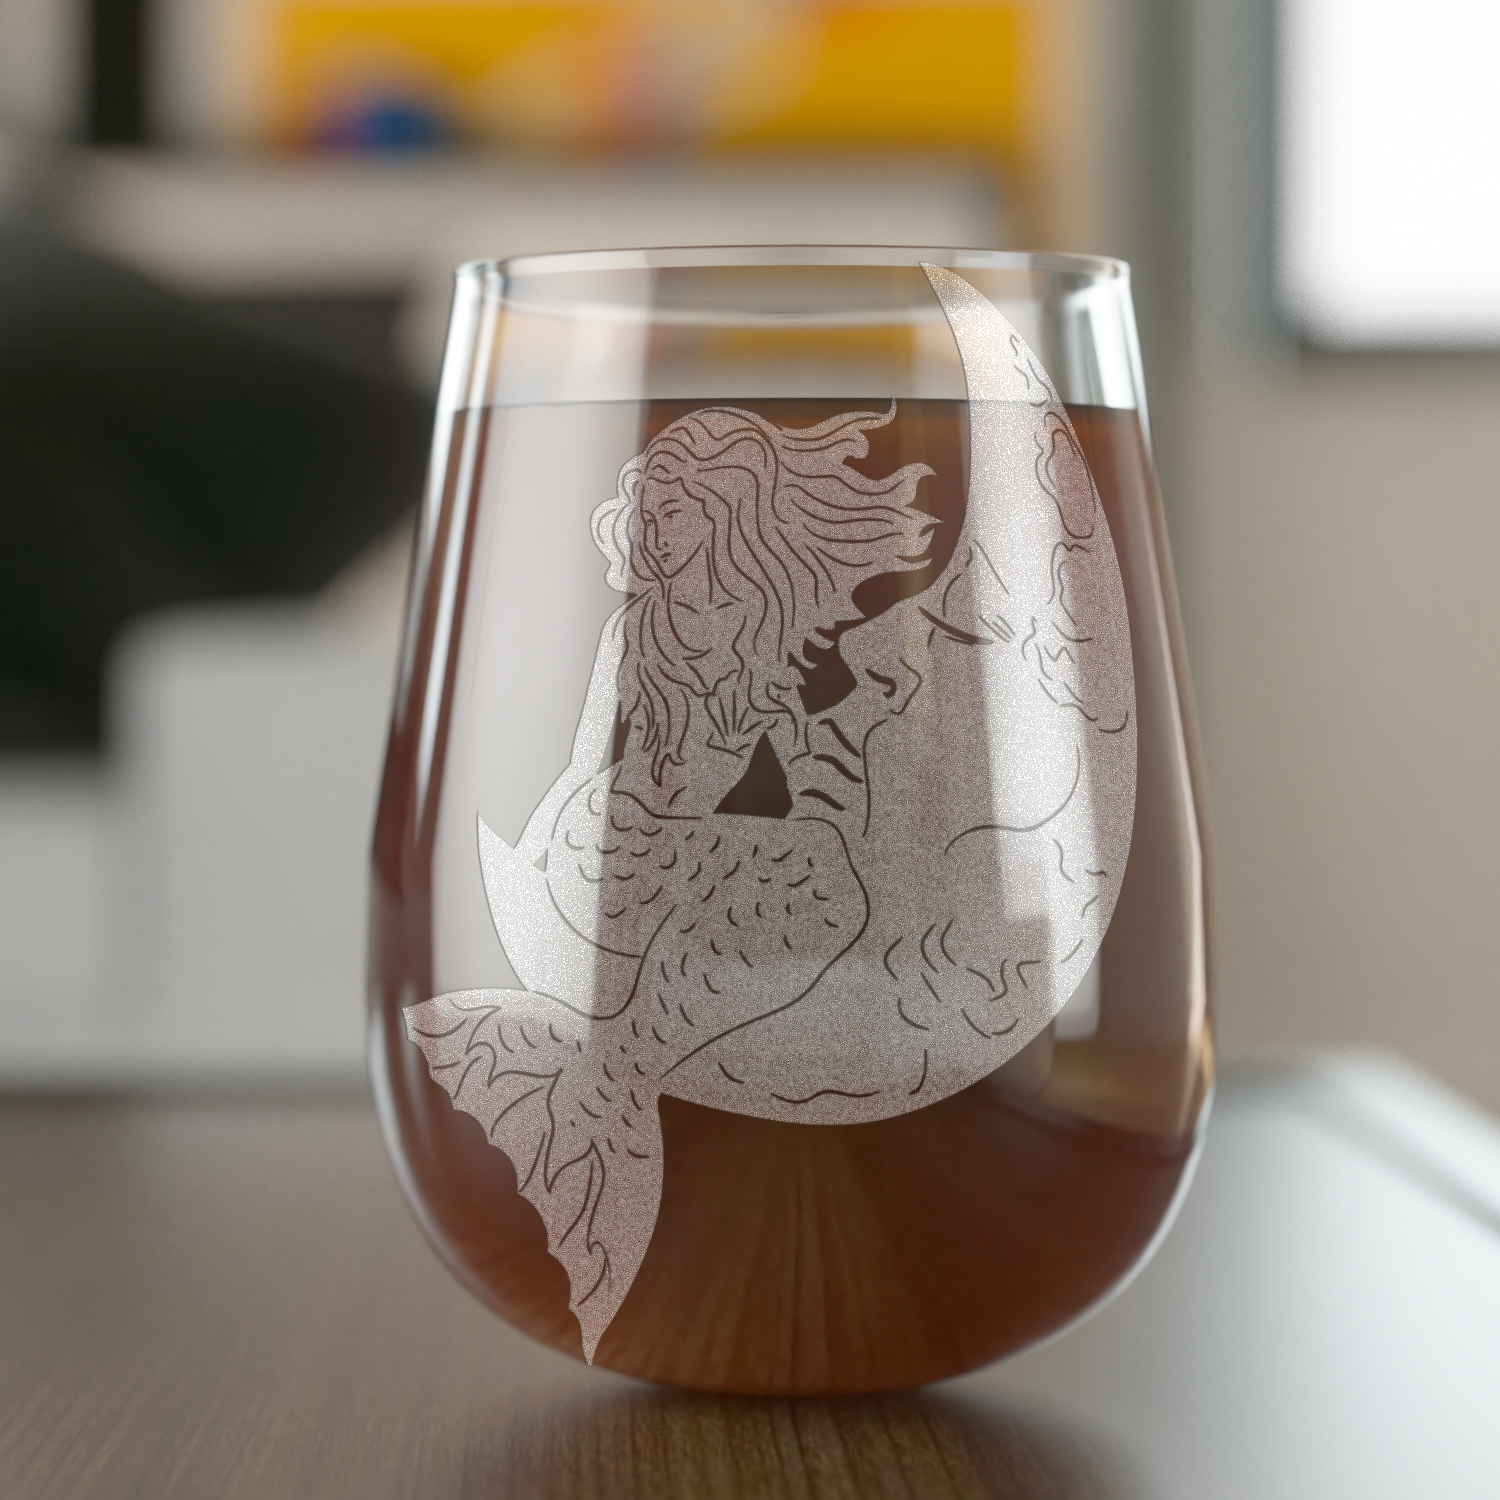 Print on a transparent cup.